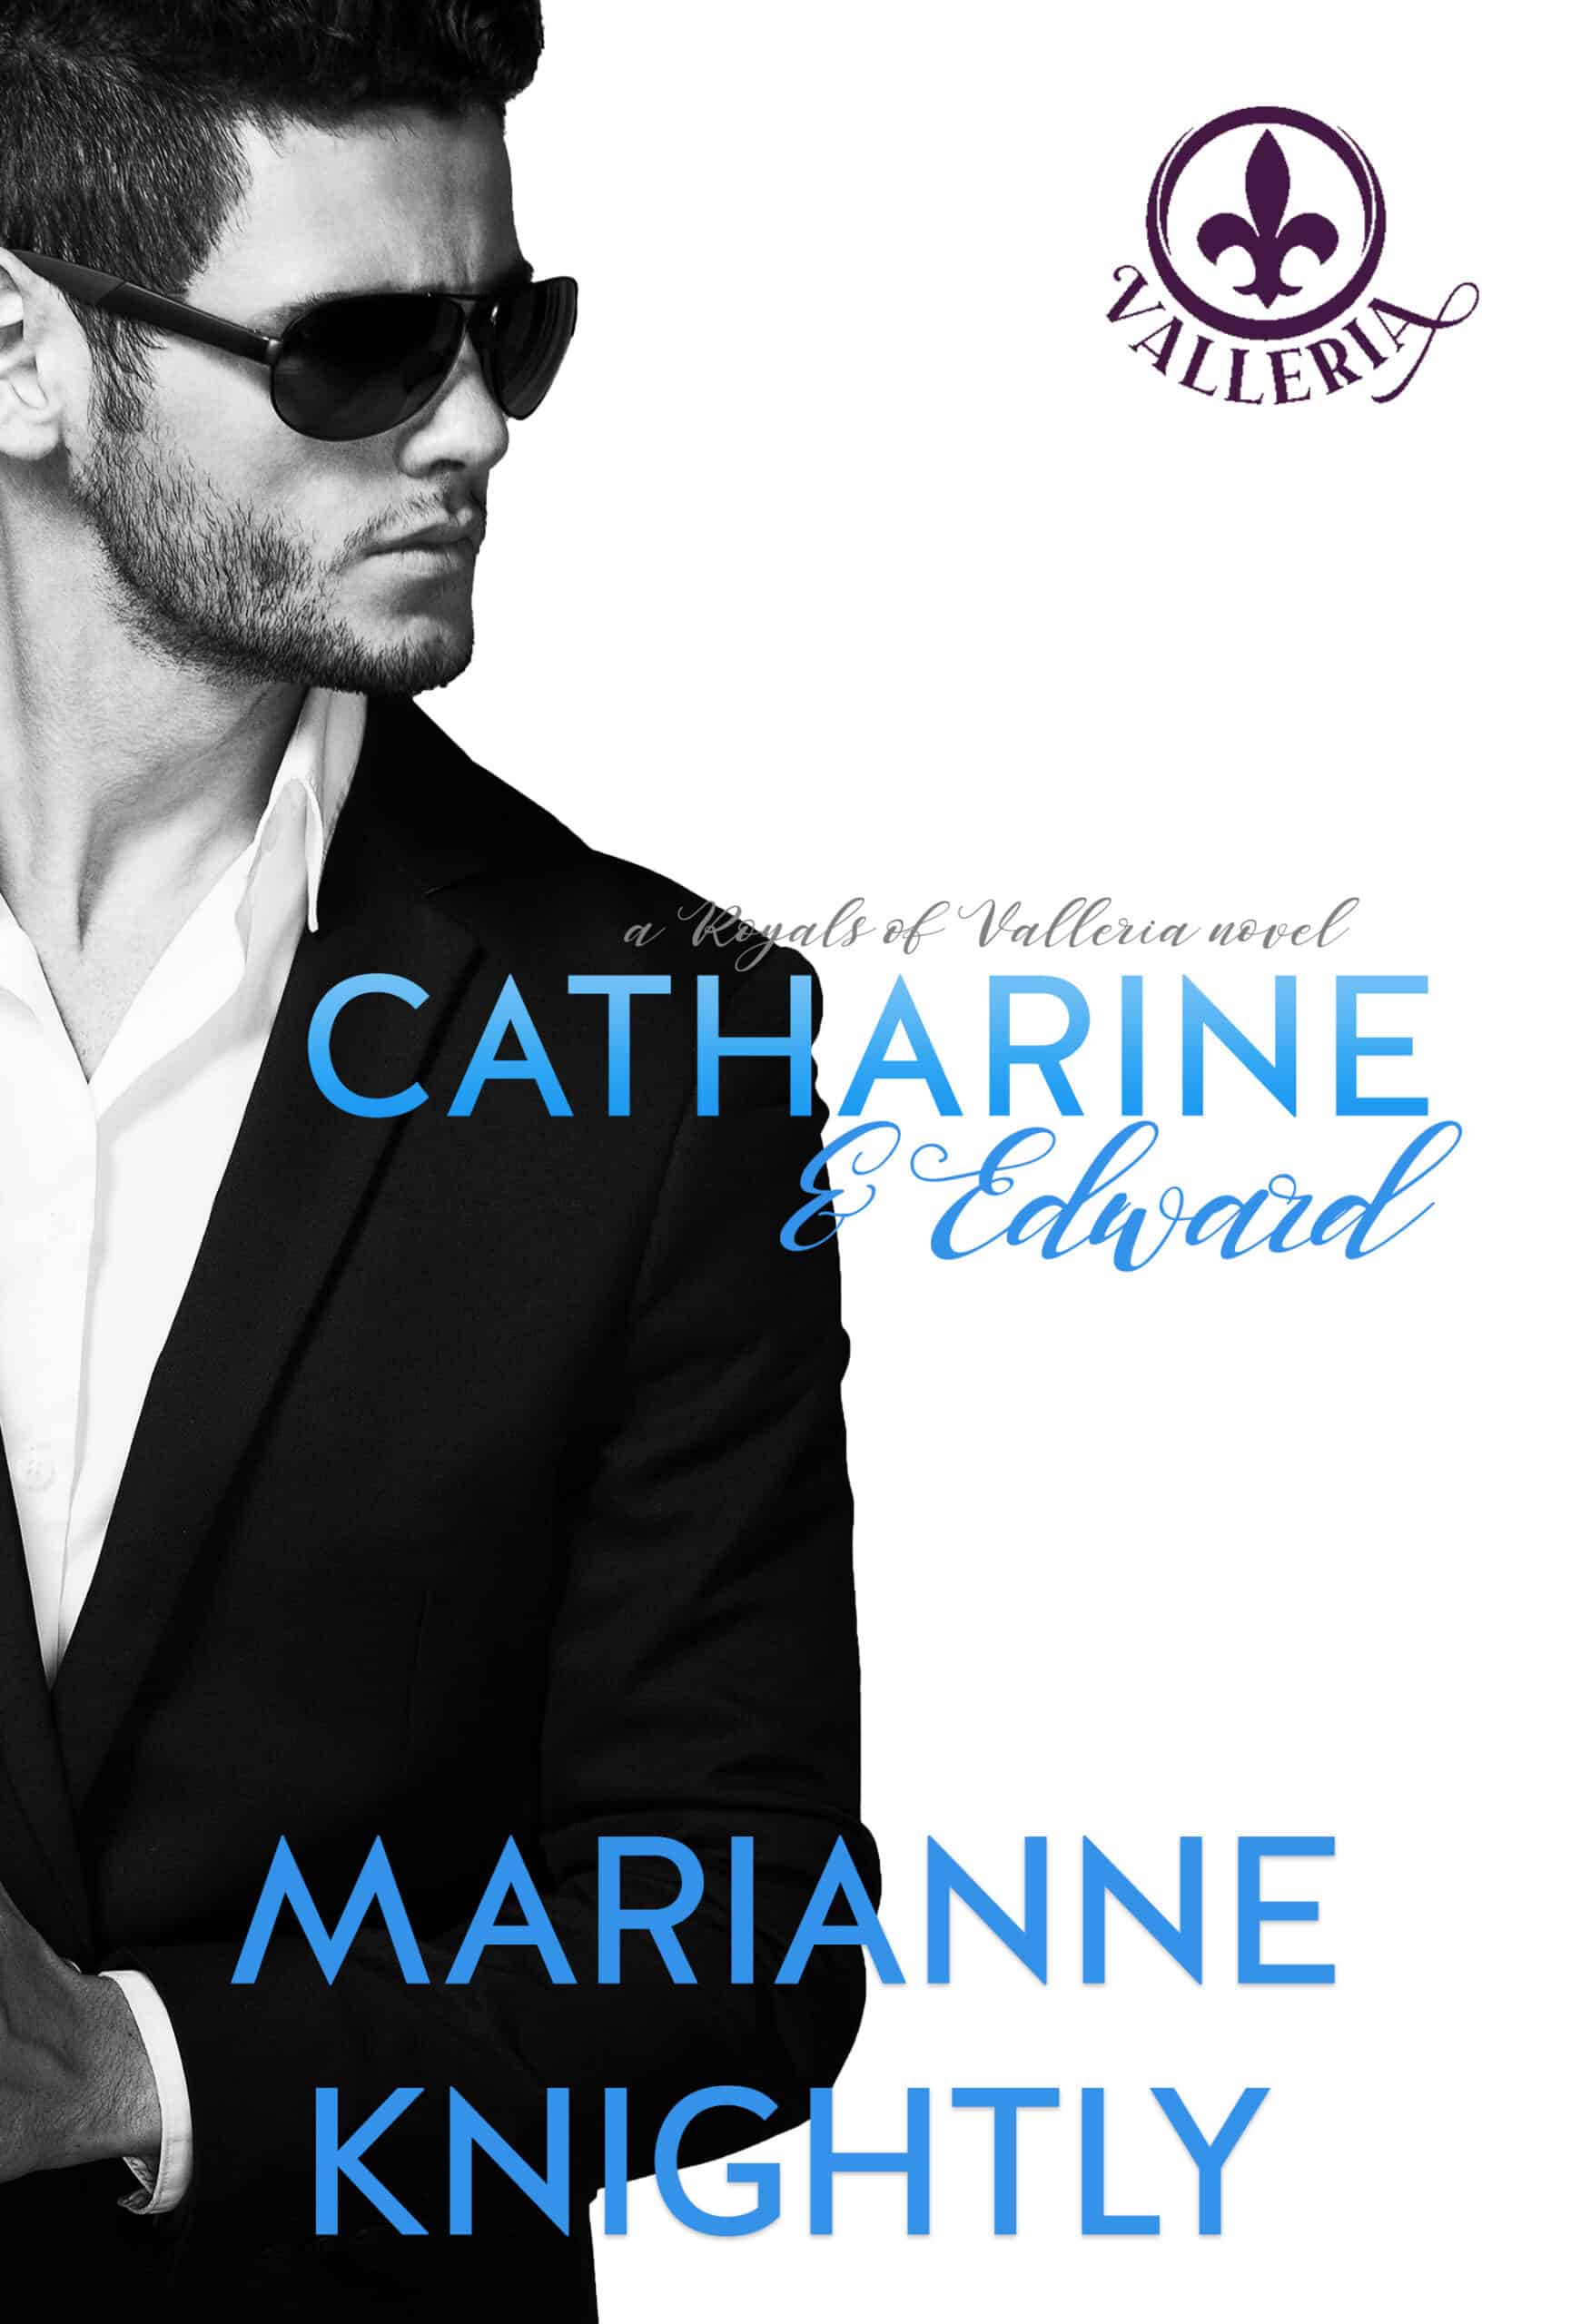 Catharine & Edward (Royals of Valleria #6) by Marianne Knightly